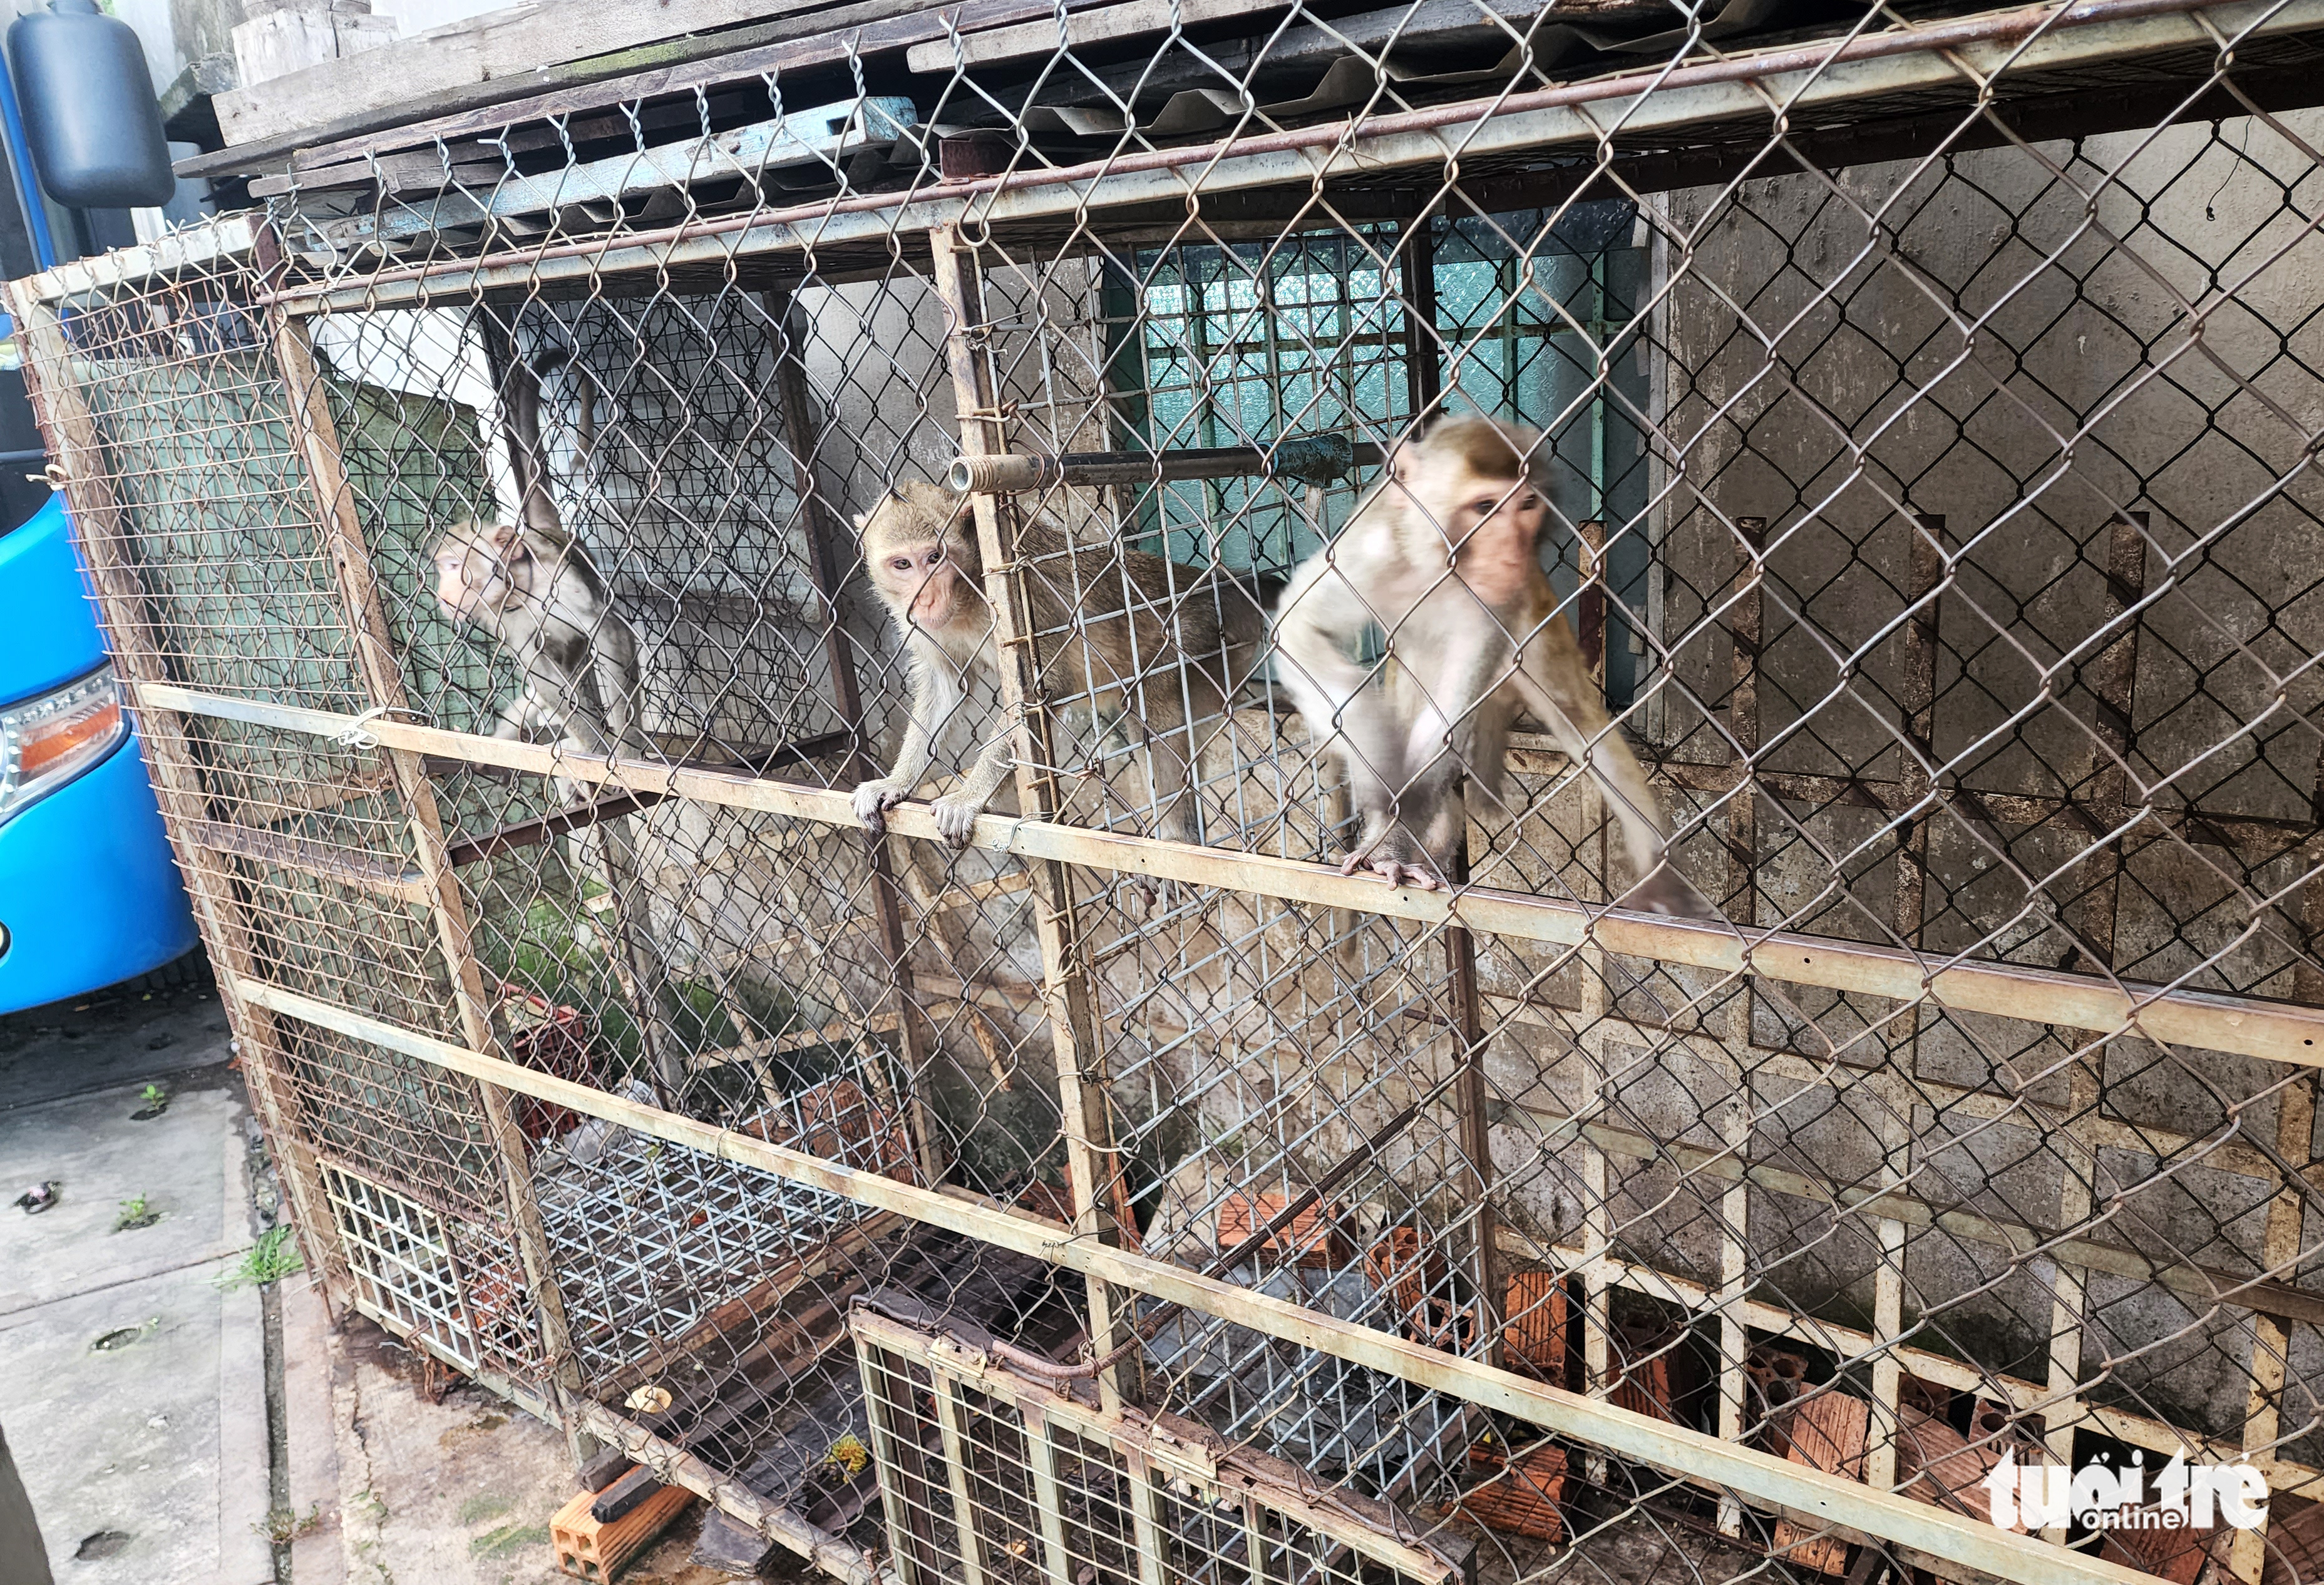 Three long-tailed macaques are kept in cages at the house of Huynh Van Thanh in Cu Chi District, Ho Chi Minh City. Photo taken on July 29, 2022. Photo: Ngoc Khai / Tuoi Tre